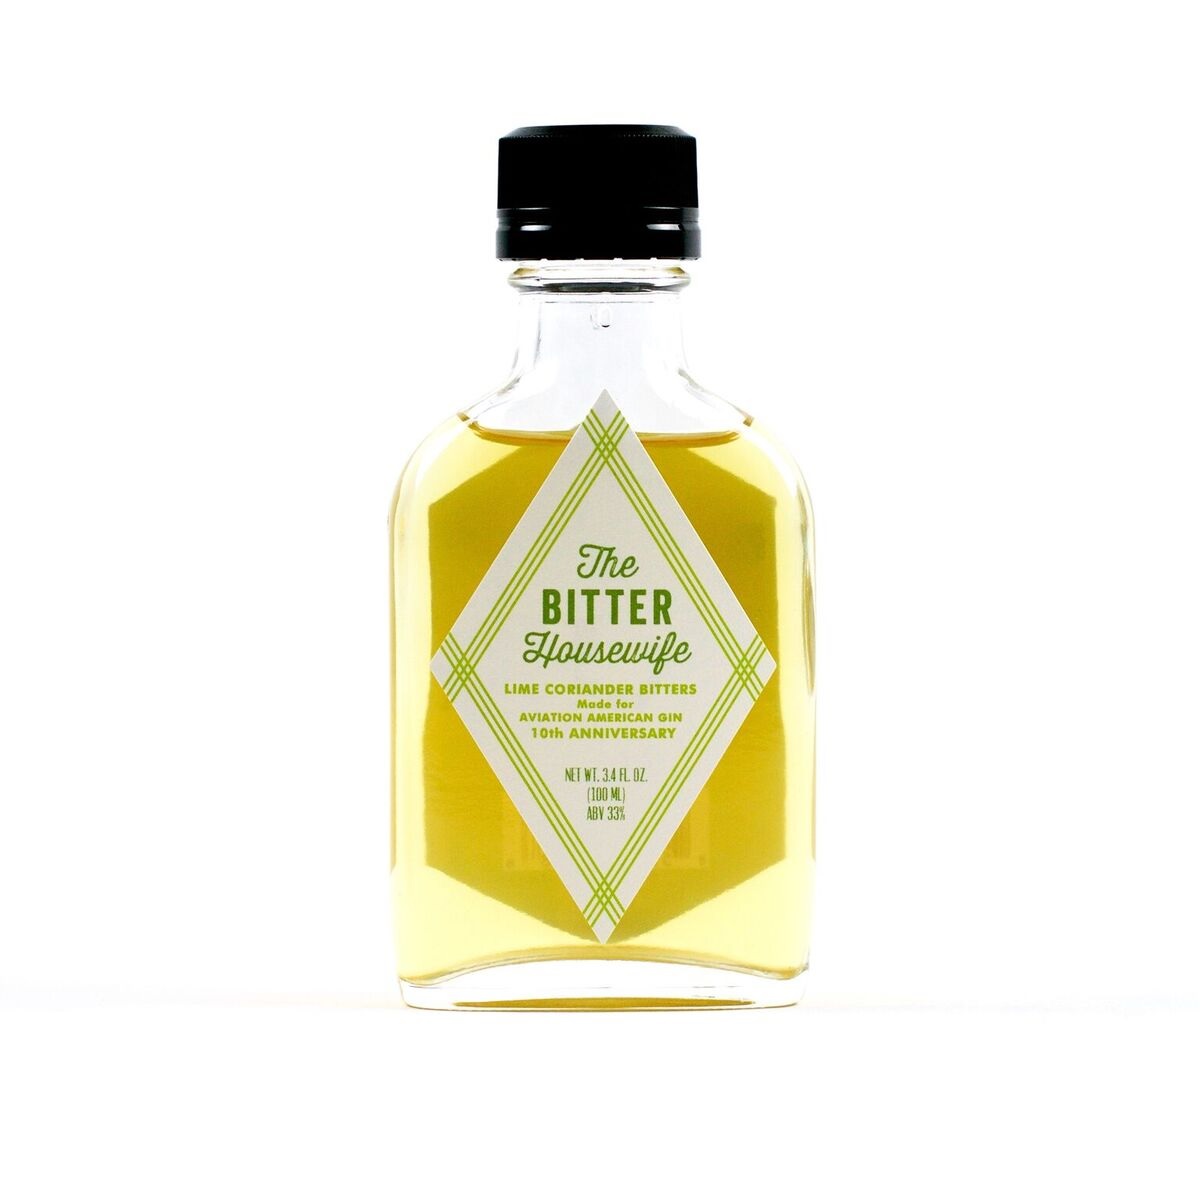 LIME CORIANDER BITTERS